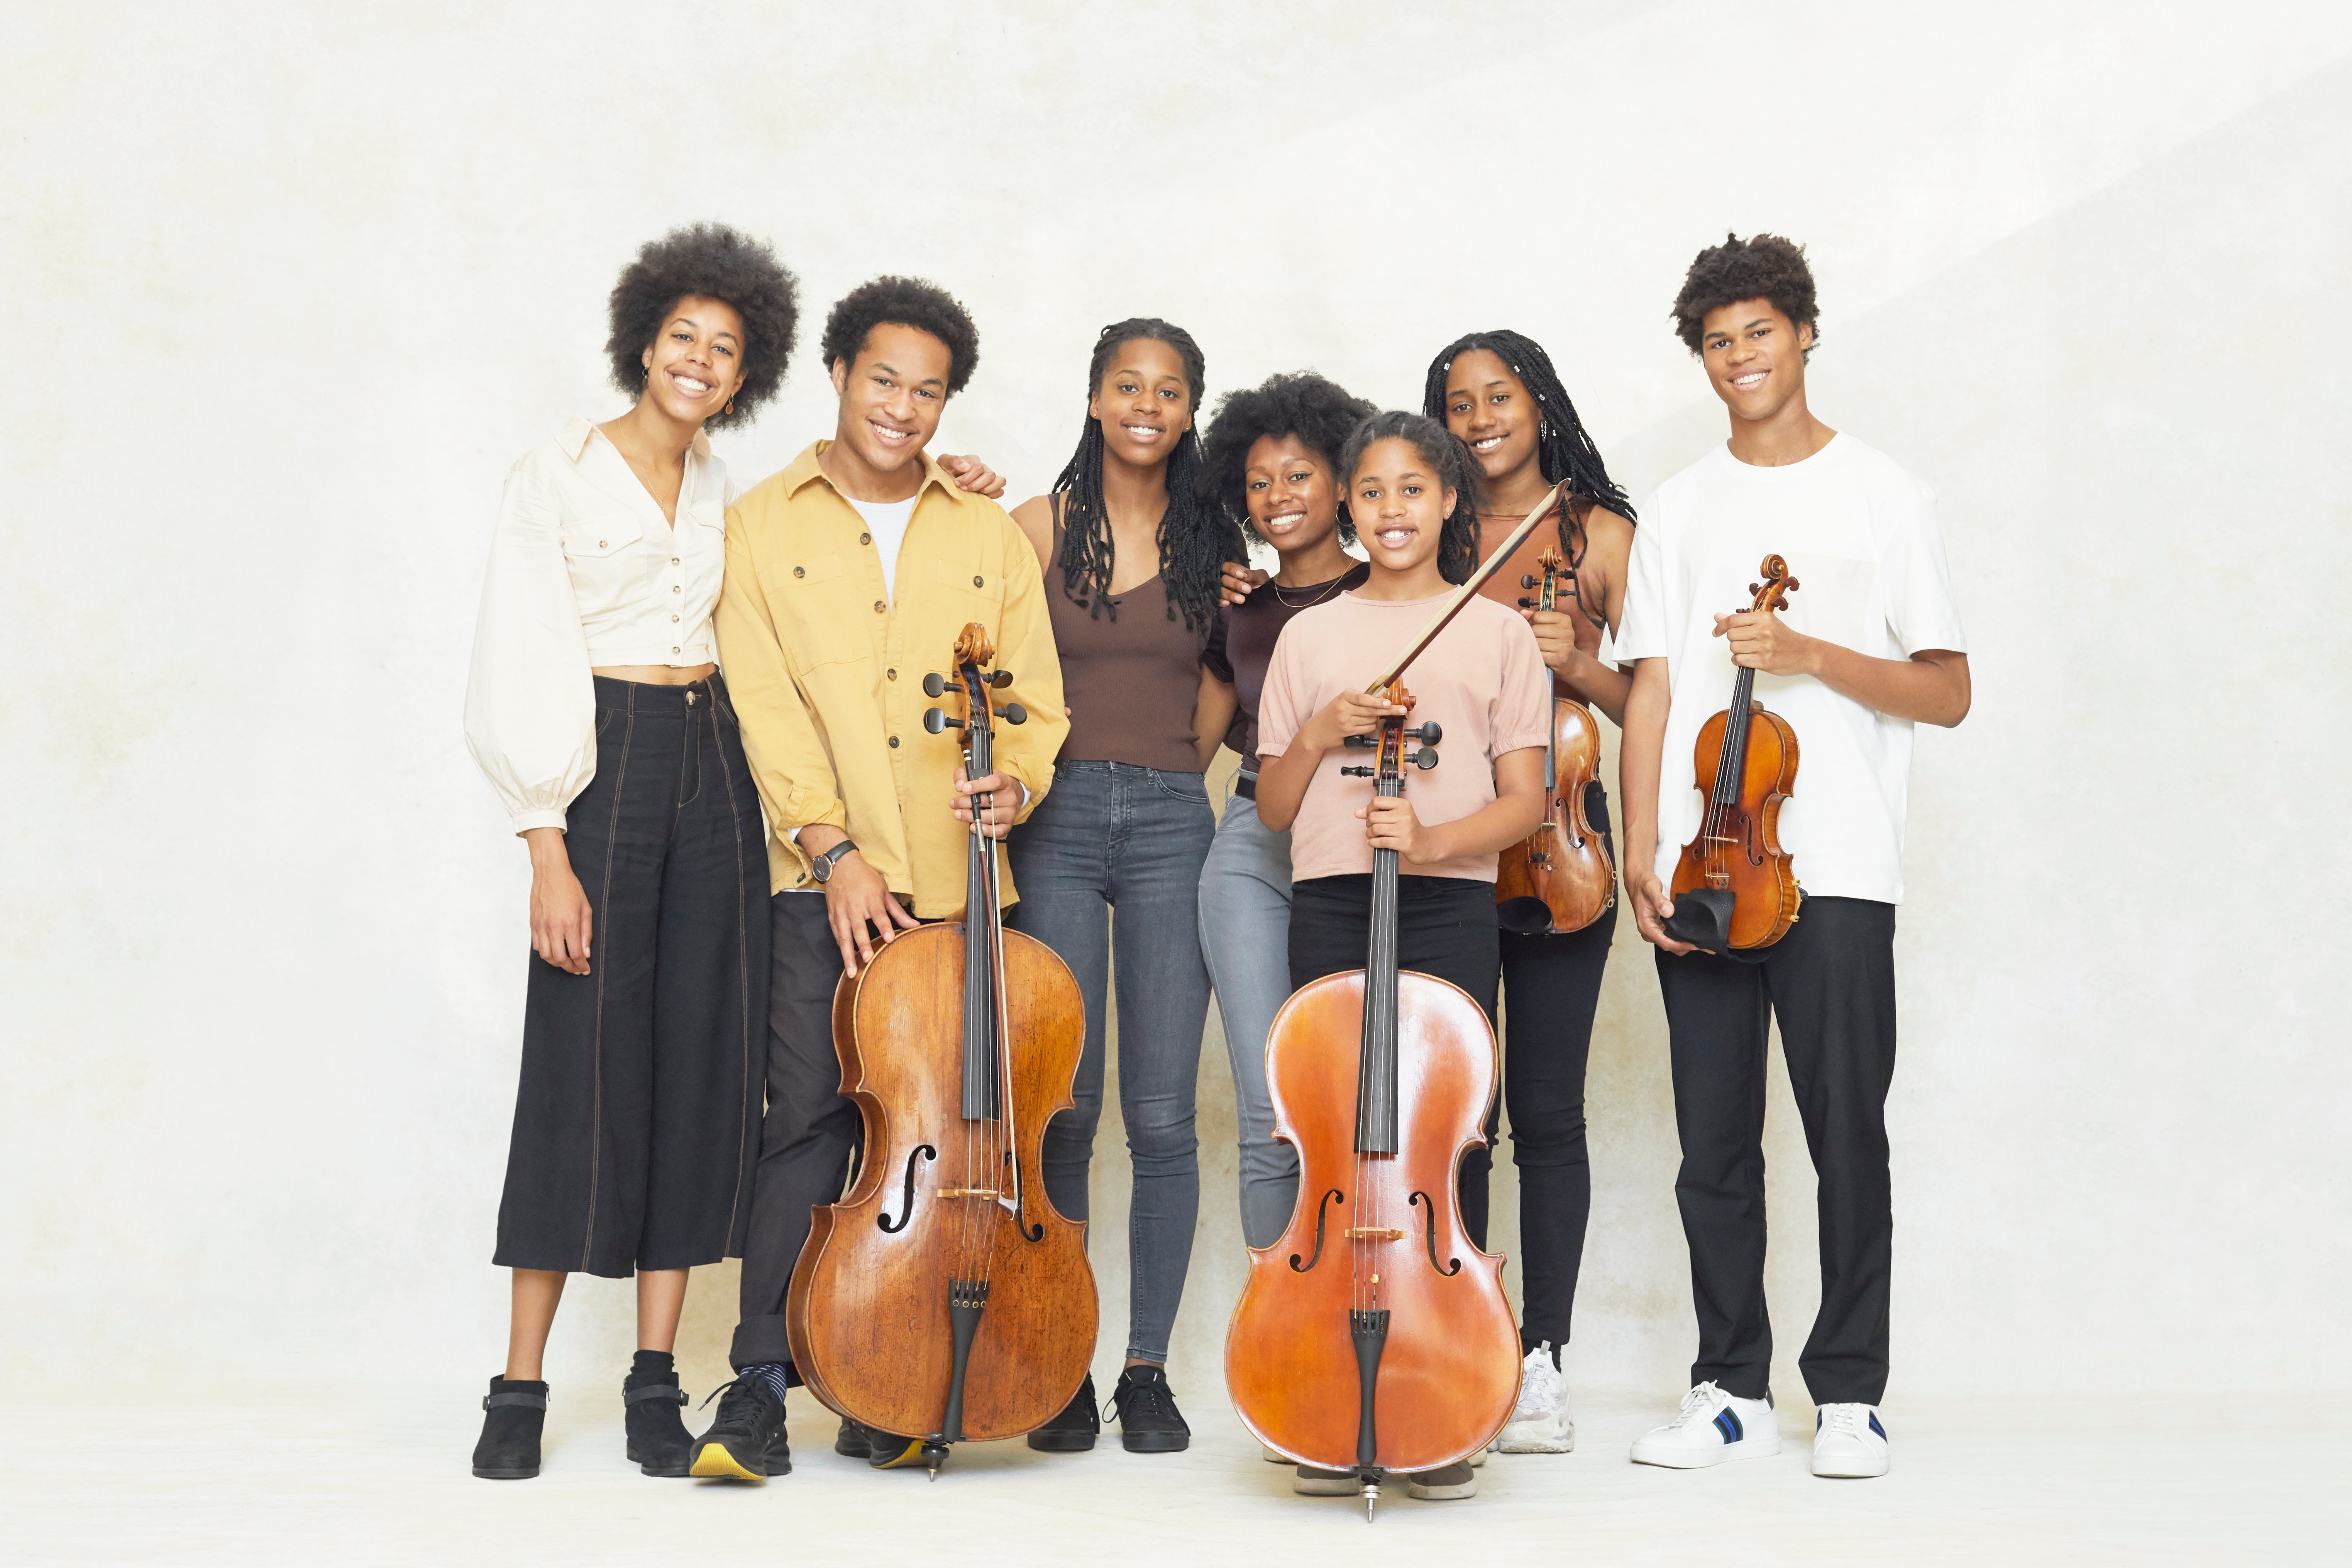 The Kanneh-Masons are a gifted sibling septet who have collaborated with Olivia Coleman on their new CD